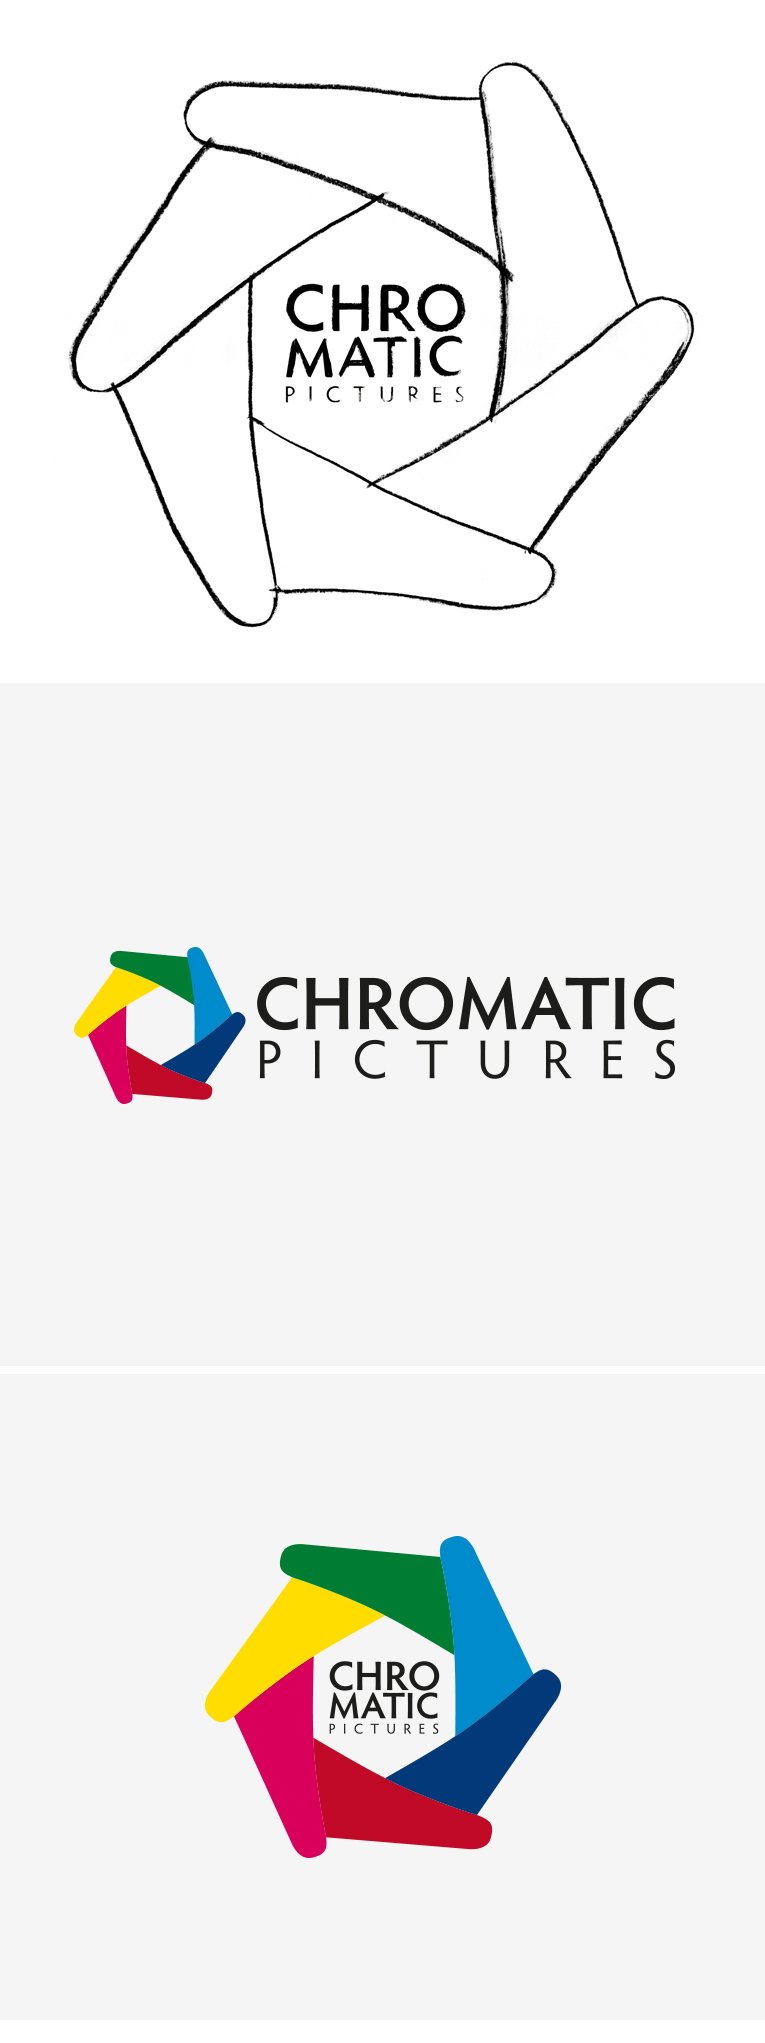 Chromatic Pictures